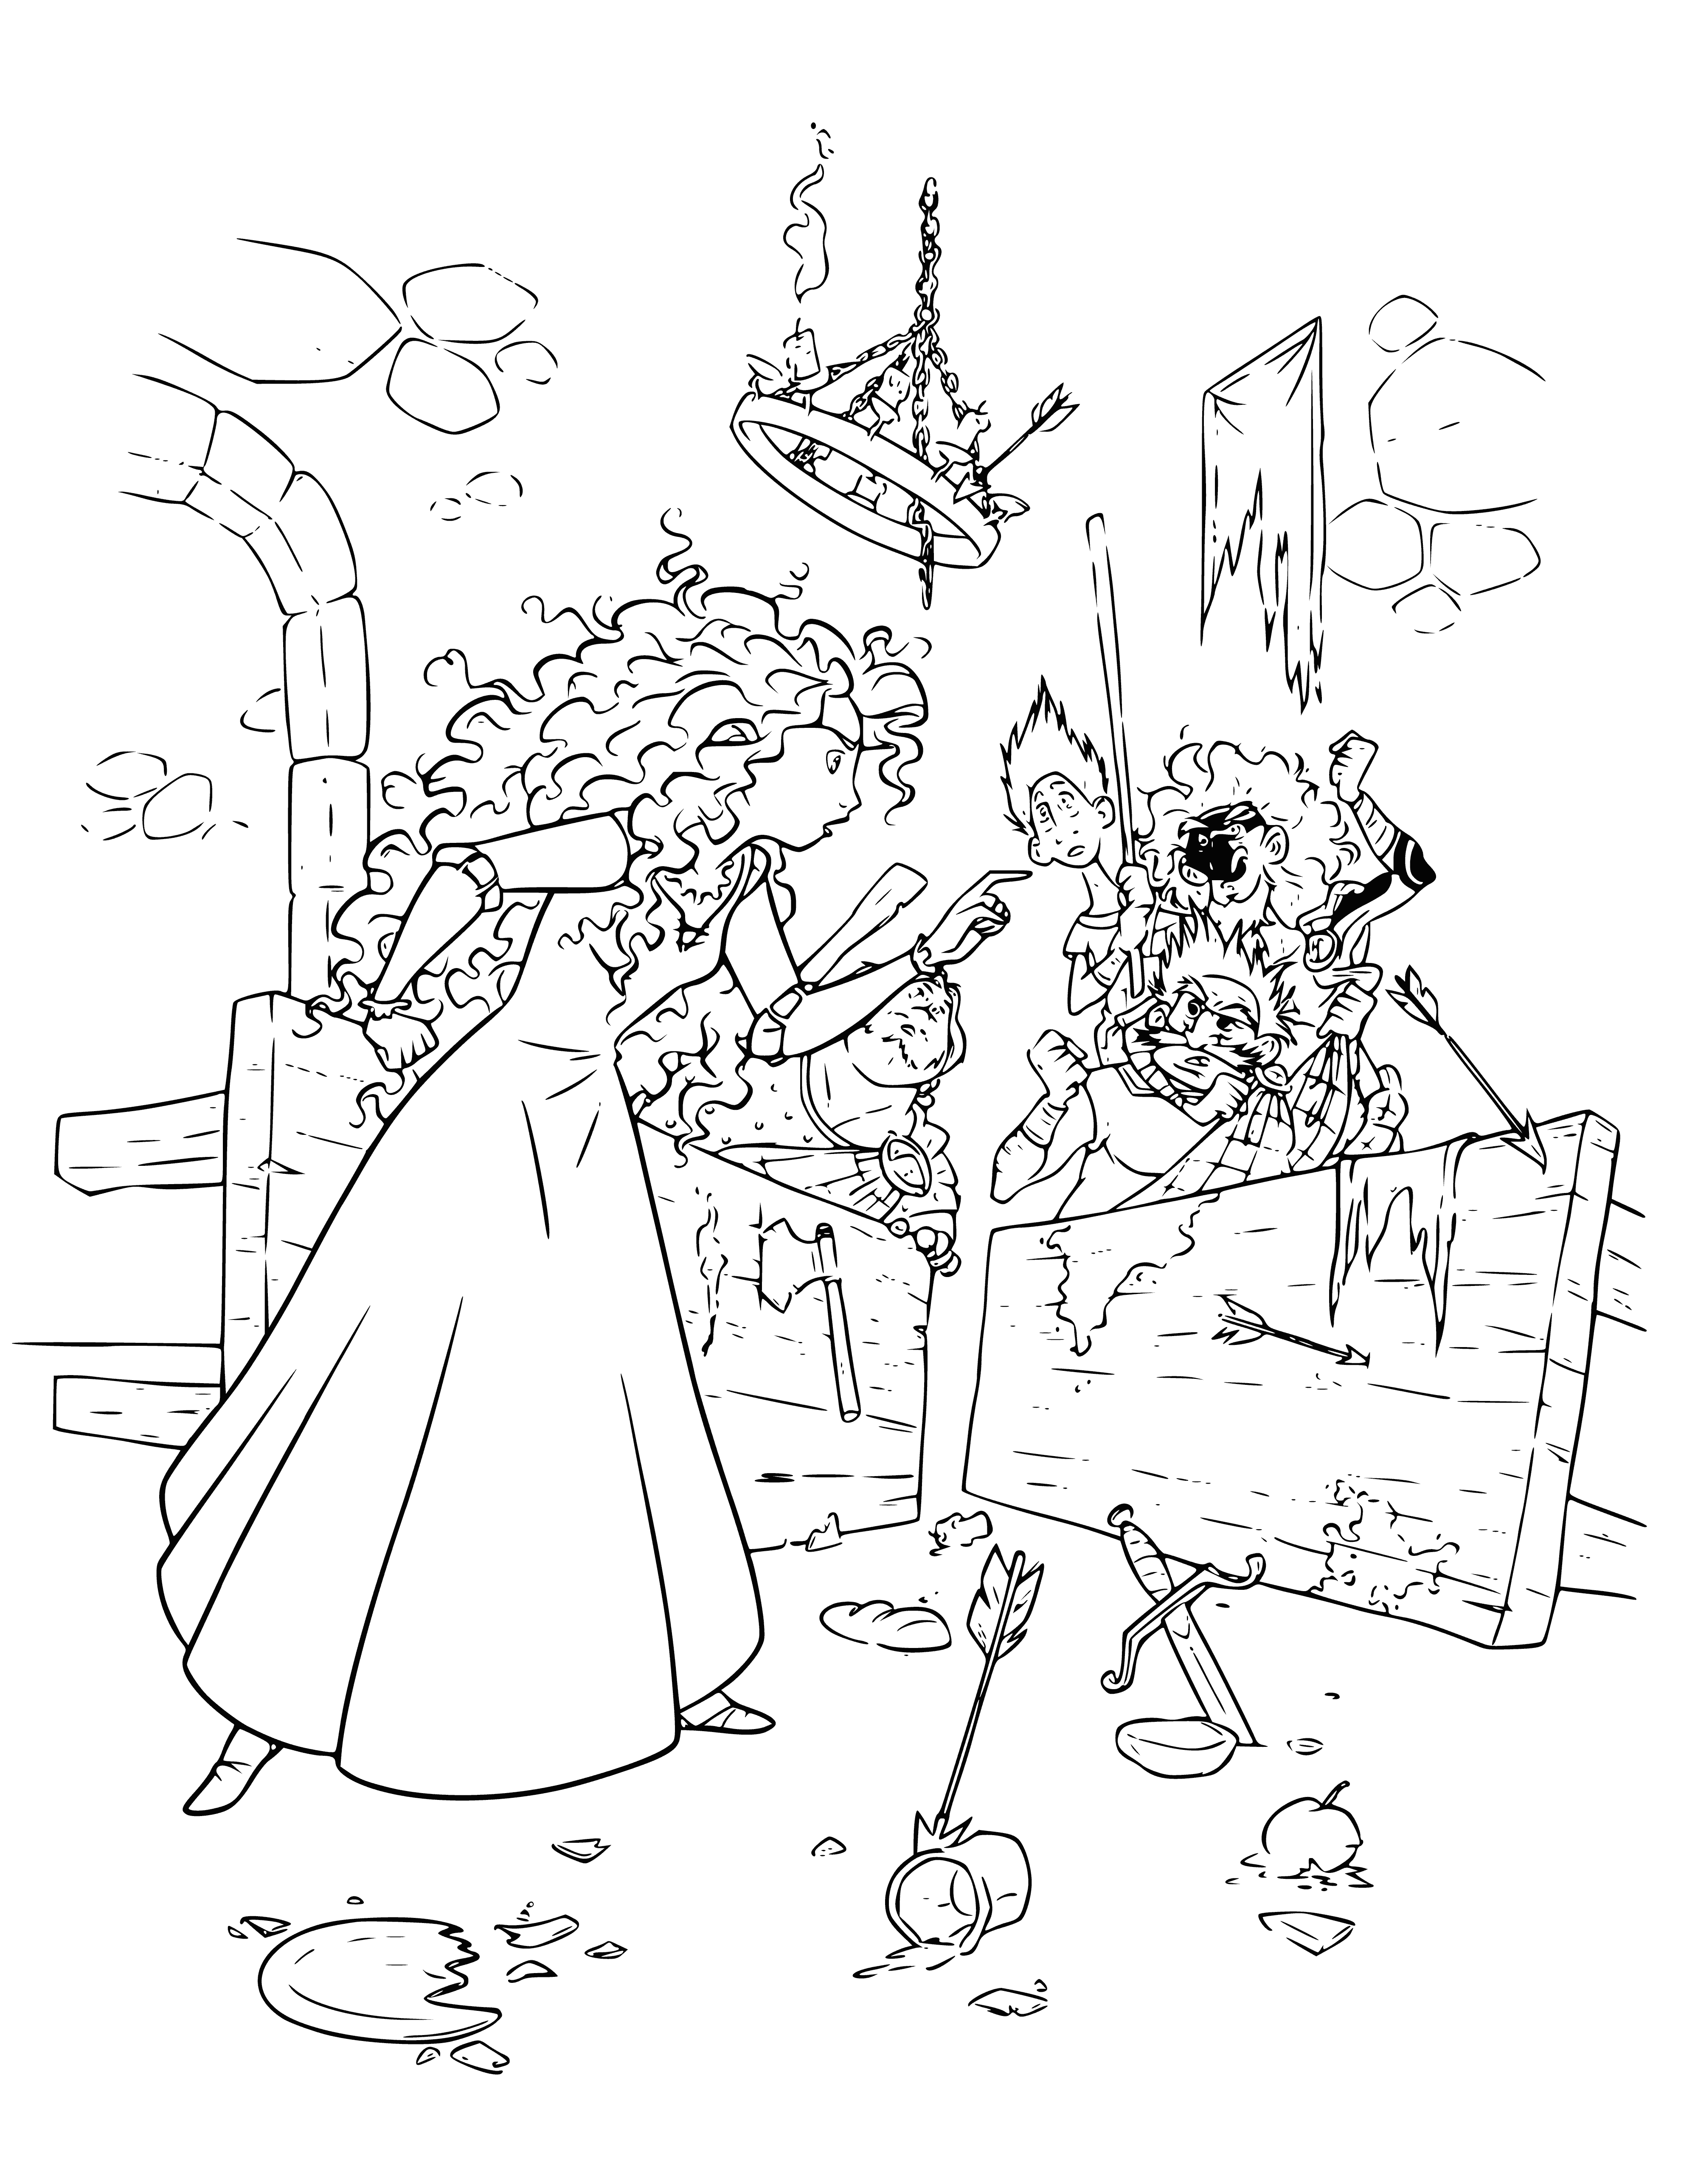 Princess Merida pacifies the lords coloring page